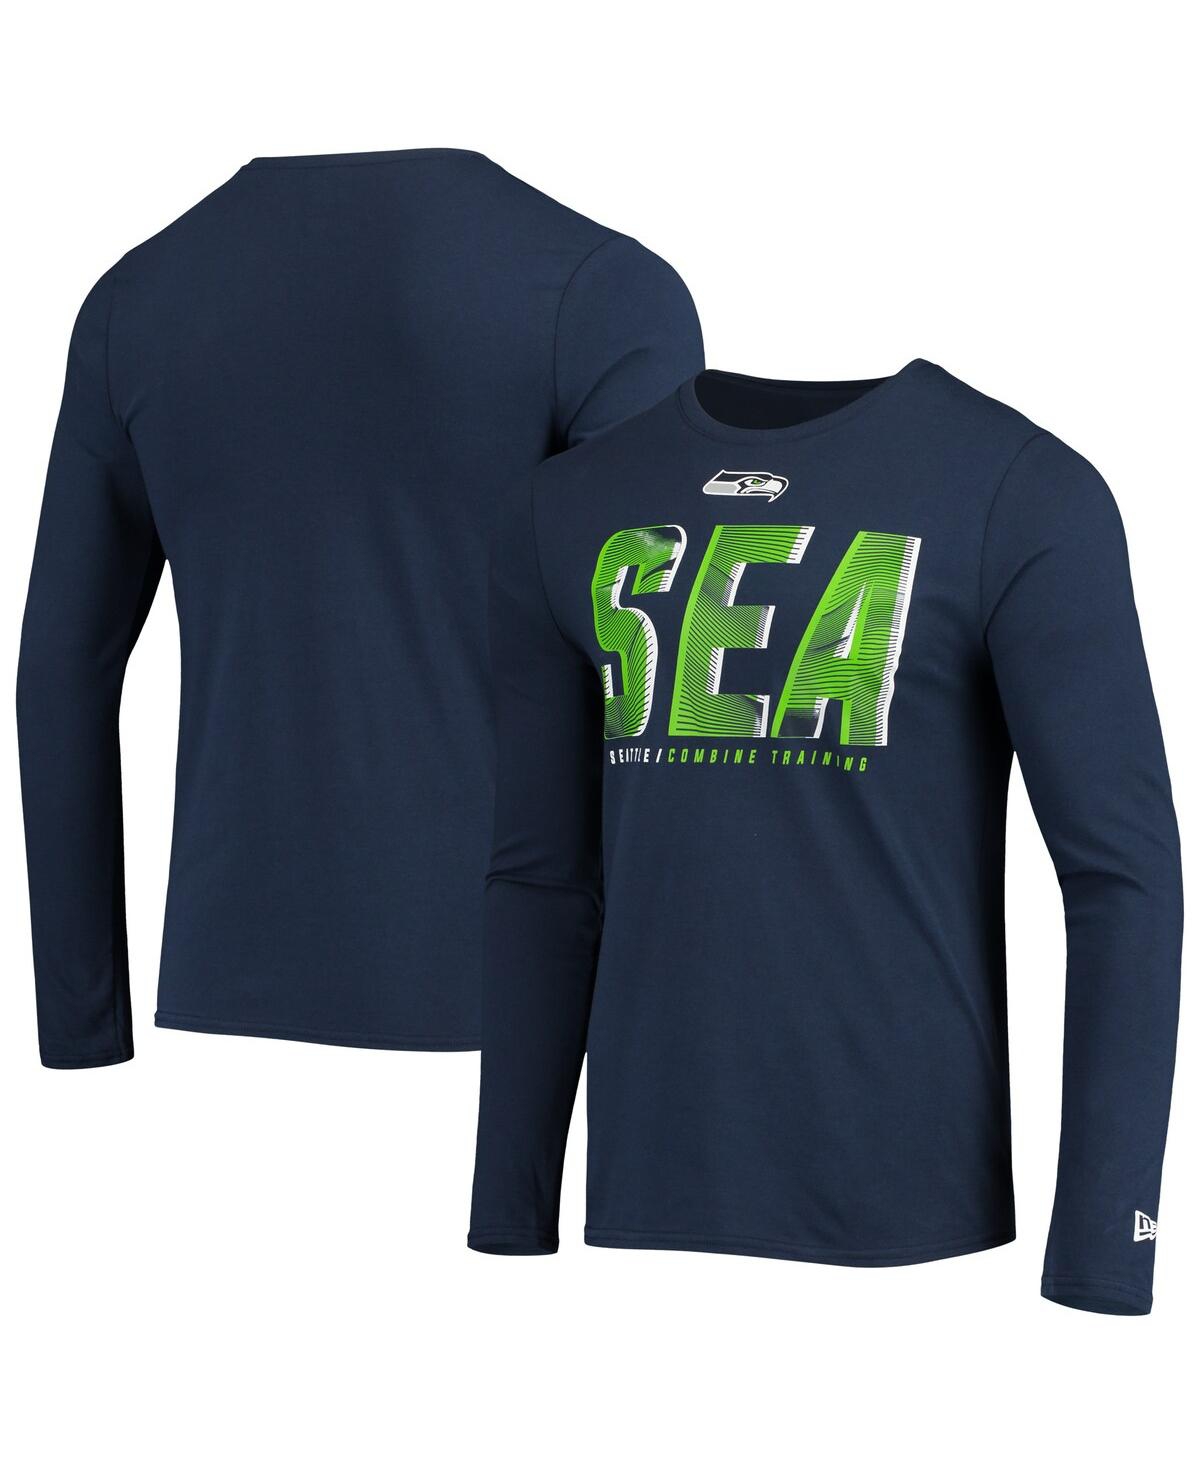 New Era Men's  College Navy Seattle Seahawks Combine Authentic Static Abbreviation Long Sleeve T-shir